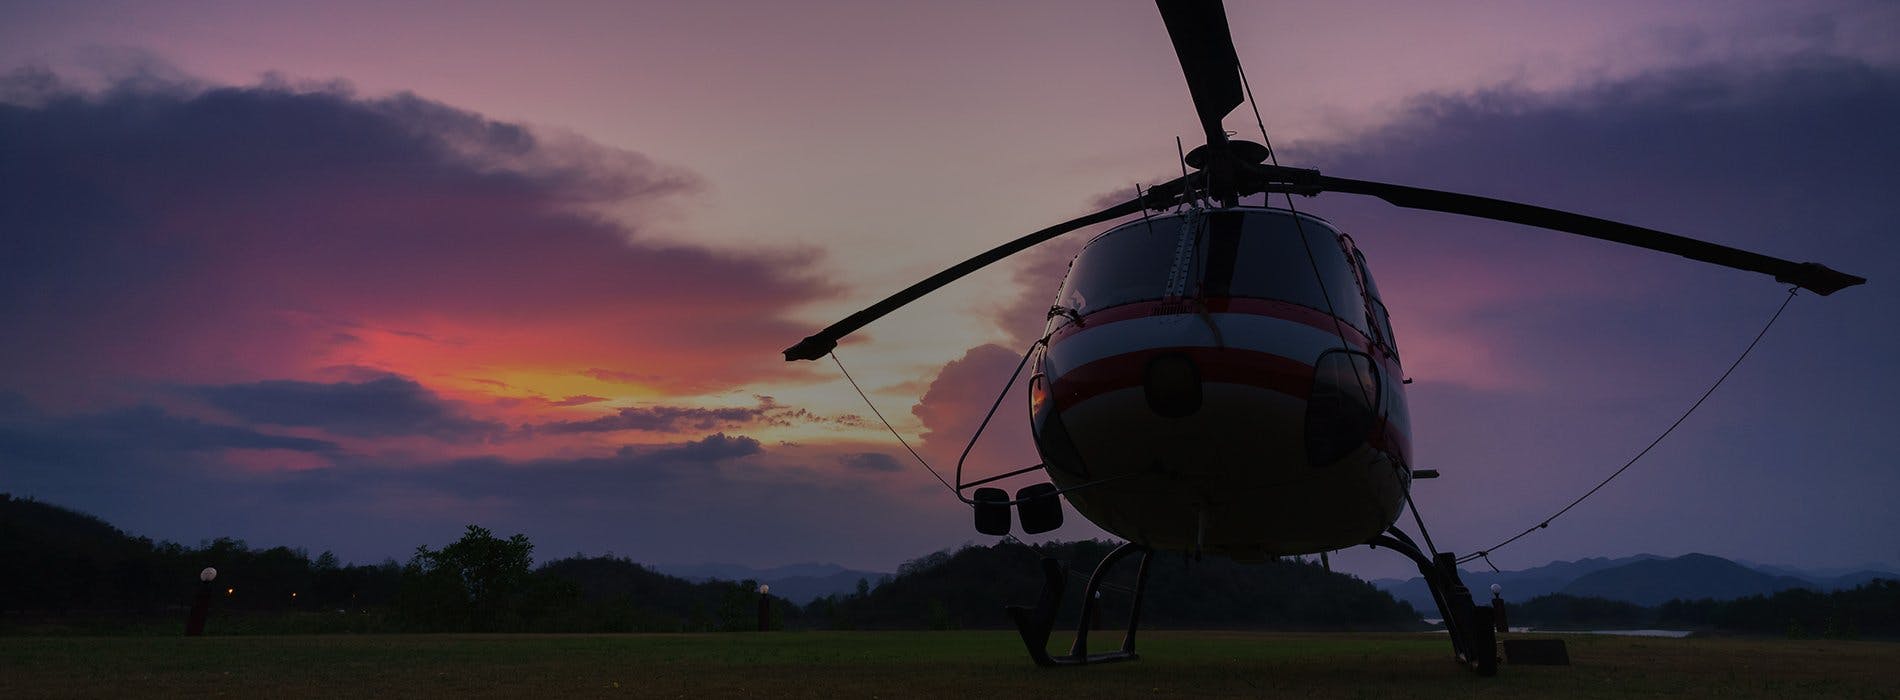 A stationary helicopter at dusk